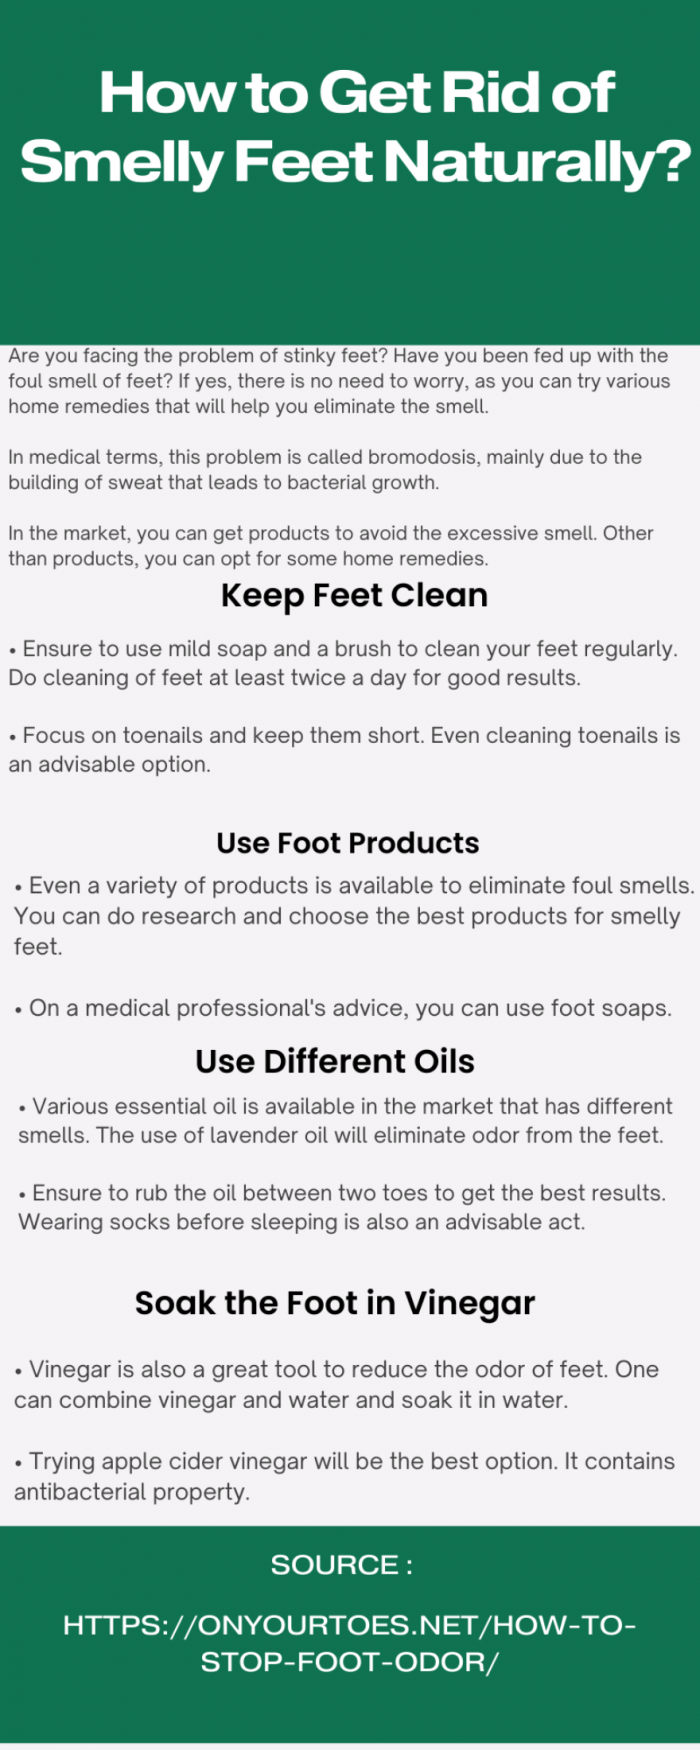 4 Must-know Home Remedies for Stinky Feet